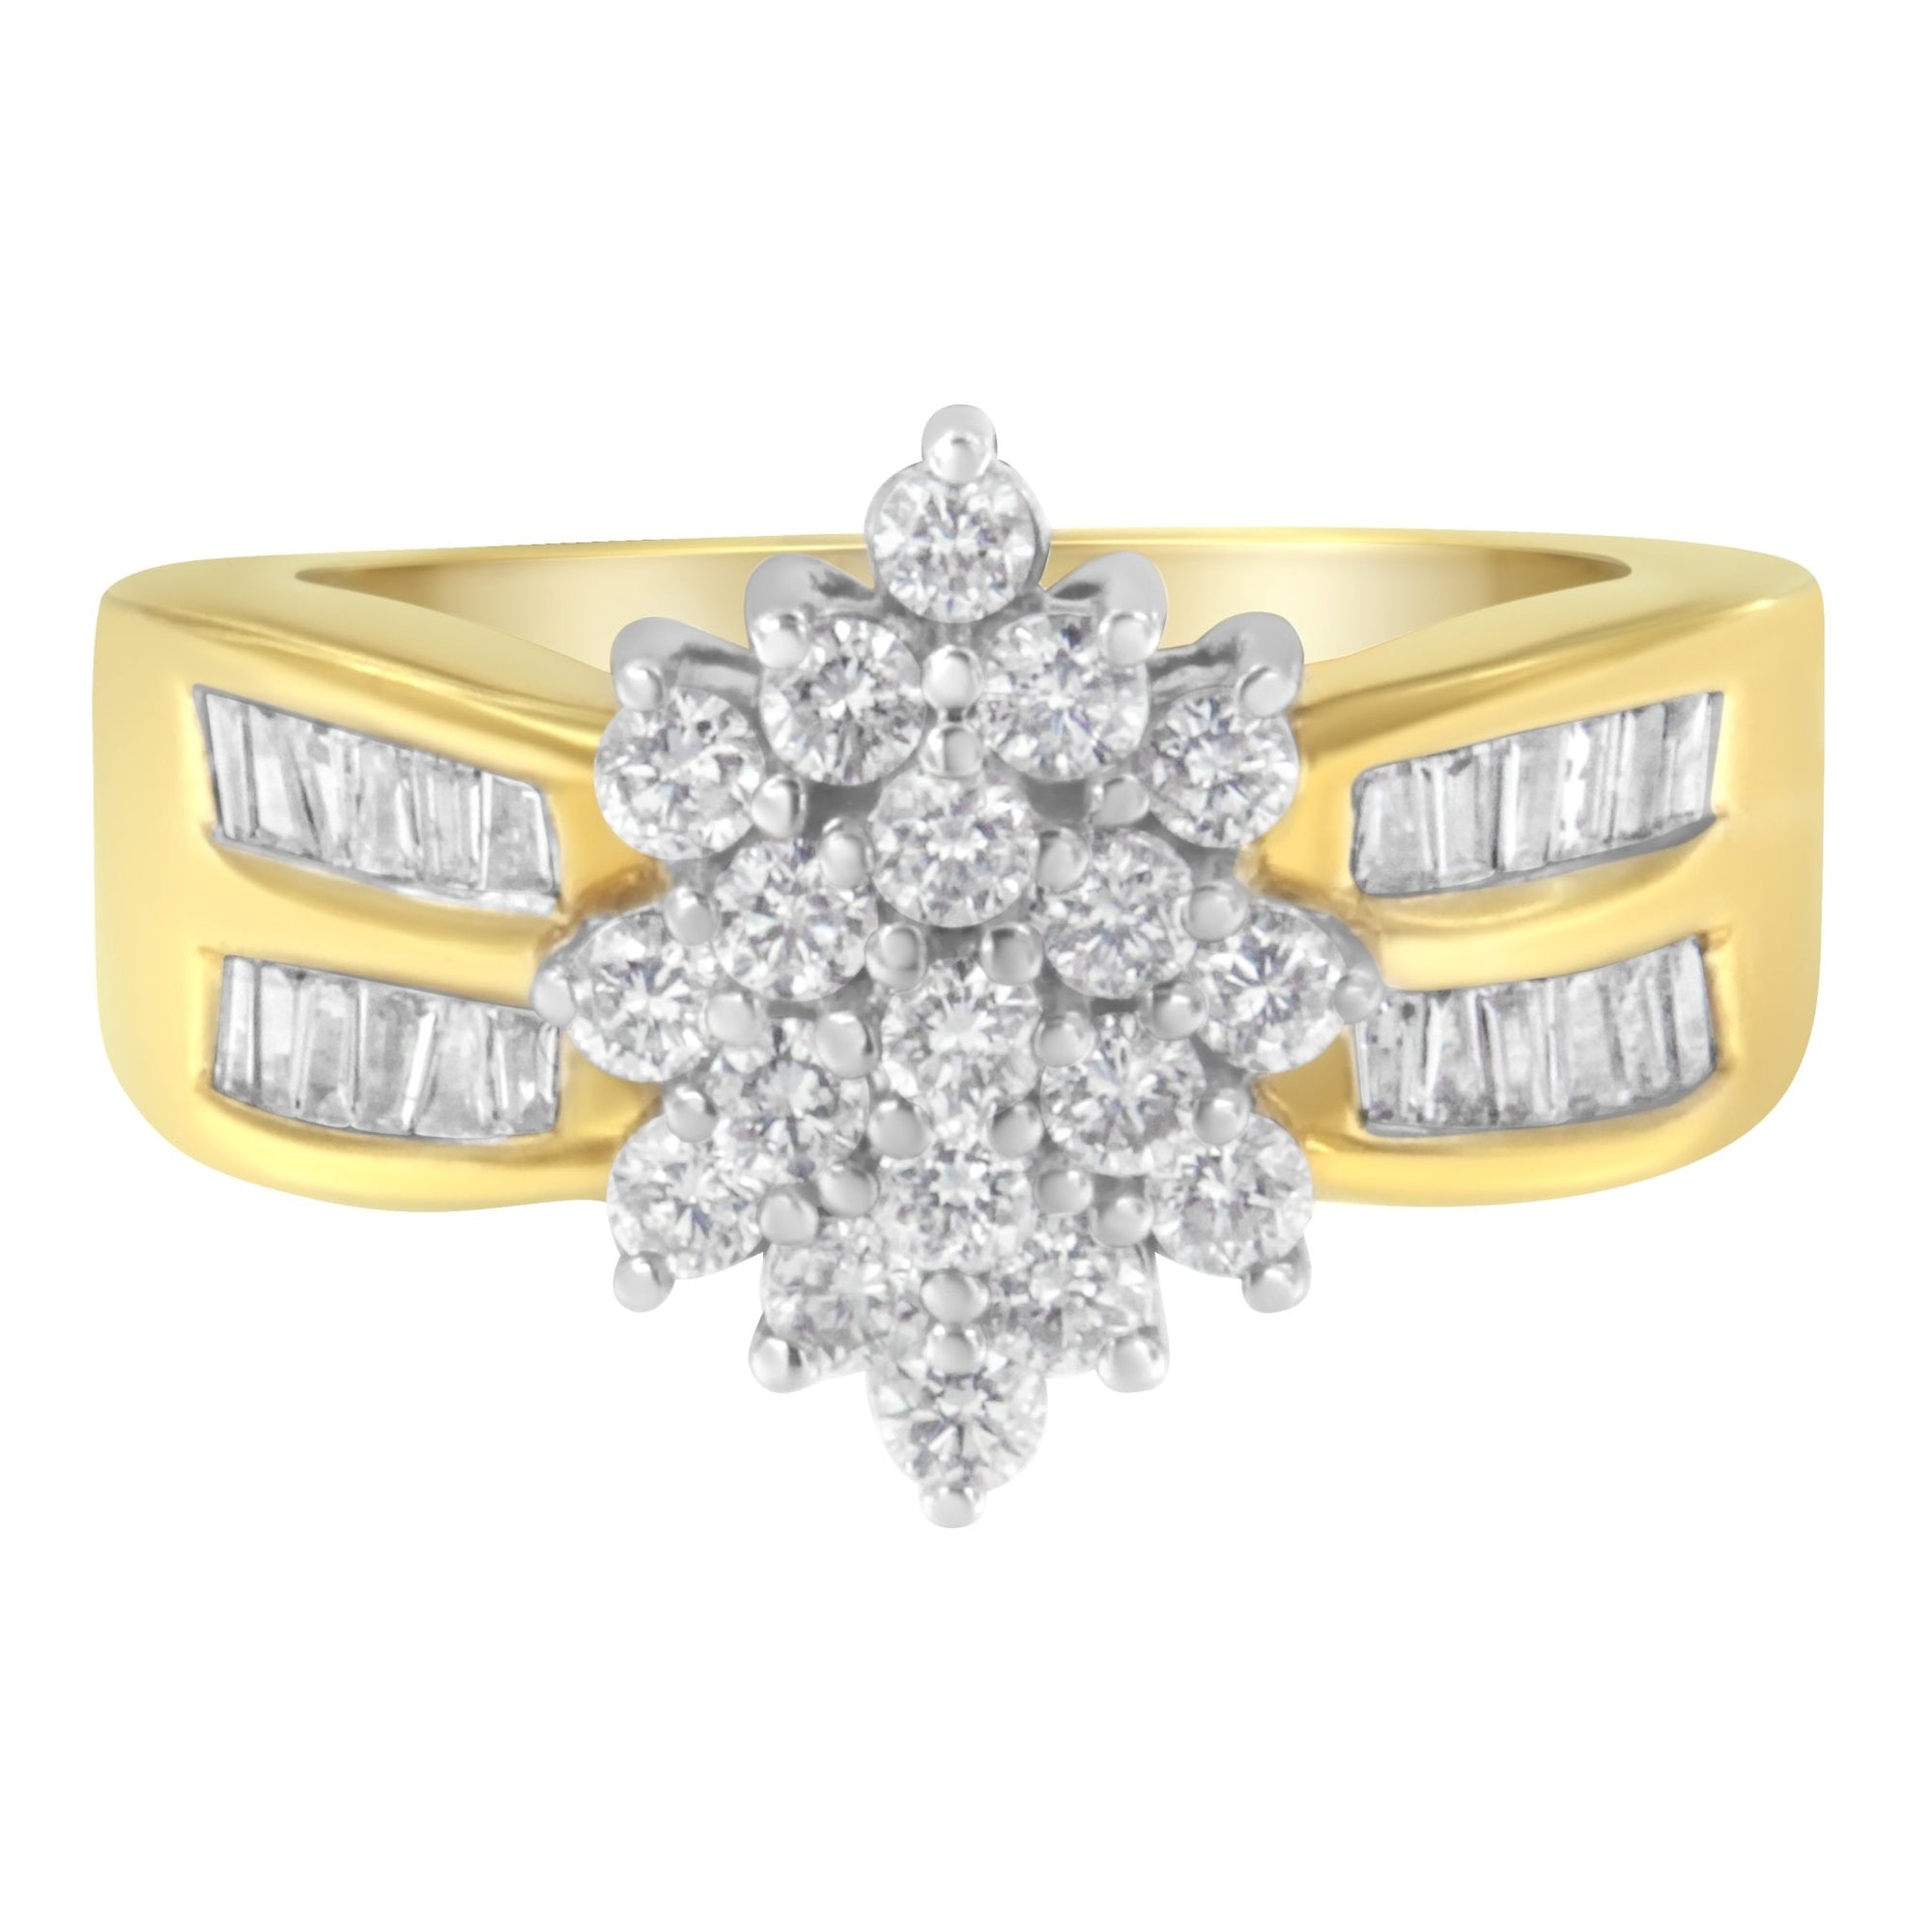 10K Yellow Gold 1.0 Cttw Marquise Composite Diamond Cluster Cocktail Ring (H-I Color, SI2-I1 Clarity) - Size 7 - LinkagejewelrydesignLinkagejewelrydesign